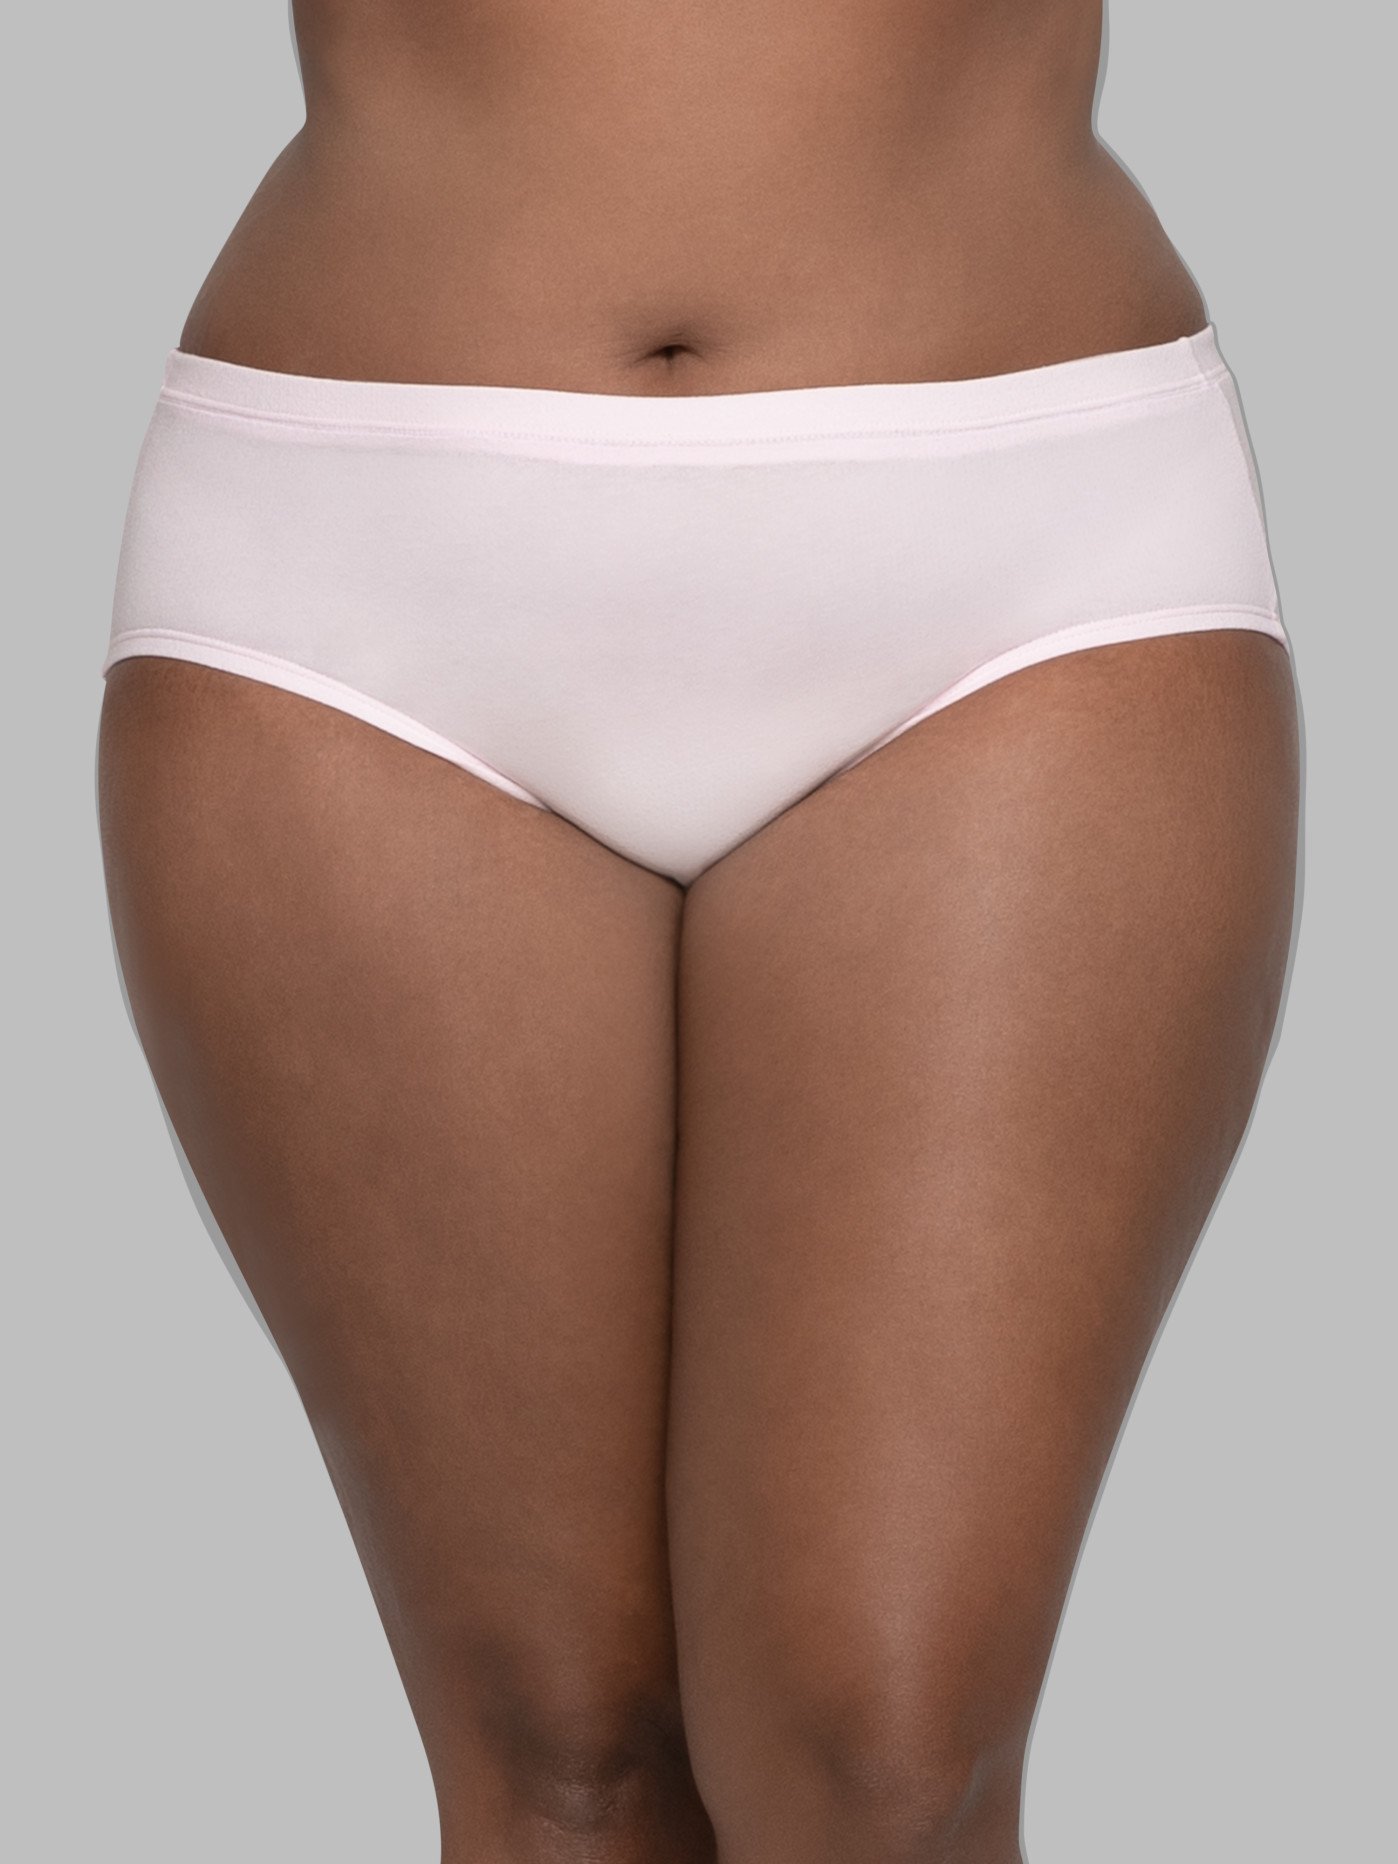 Cotton Panty, Feature : Comfortable, Quick Dry, Skin Friendly